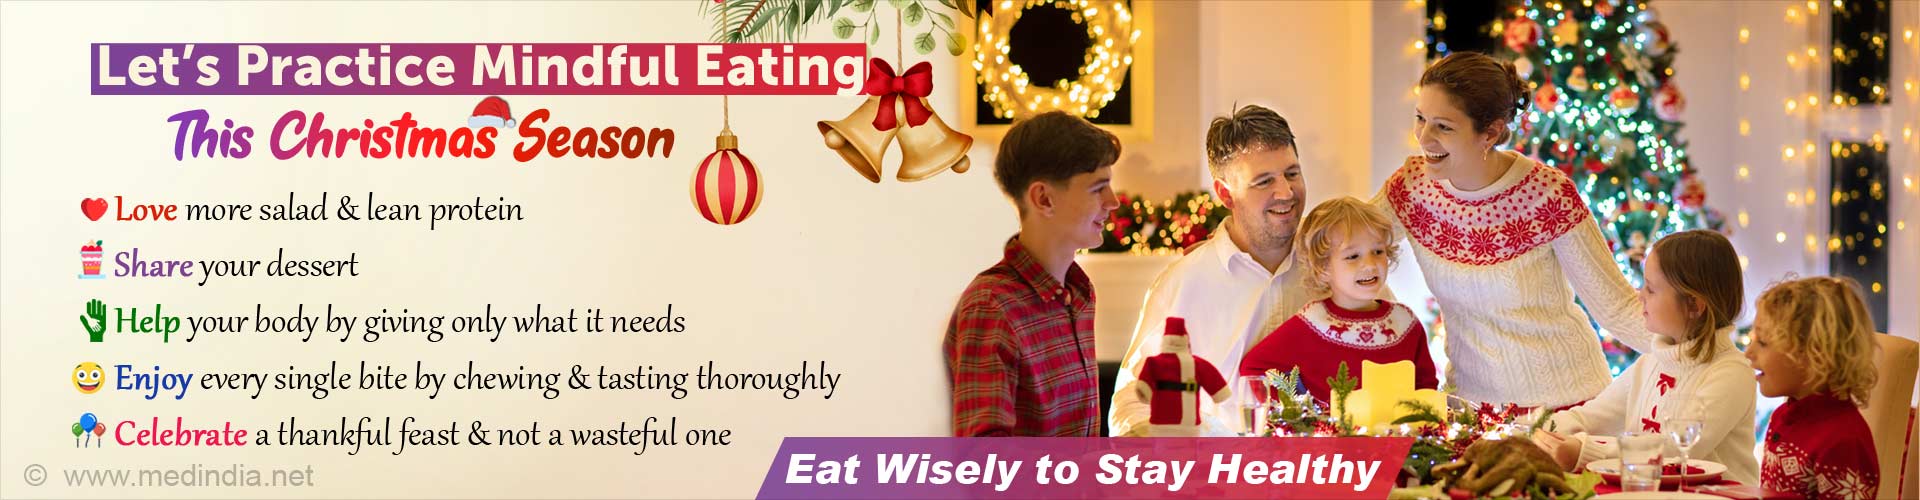 Let's Practice Mindful Eating This Christmas. Love more salad and lean protein. Share your dessert. Help your body by giving only what it needs. Enjoy every single bite by chewing & tasting thoroughly. Celebrate a thankful feast & not a wasteful one. Eat wisely to stay healthy.  